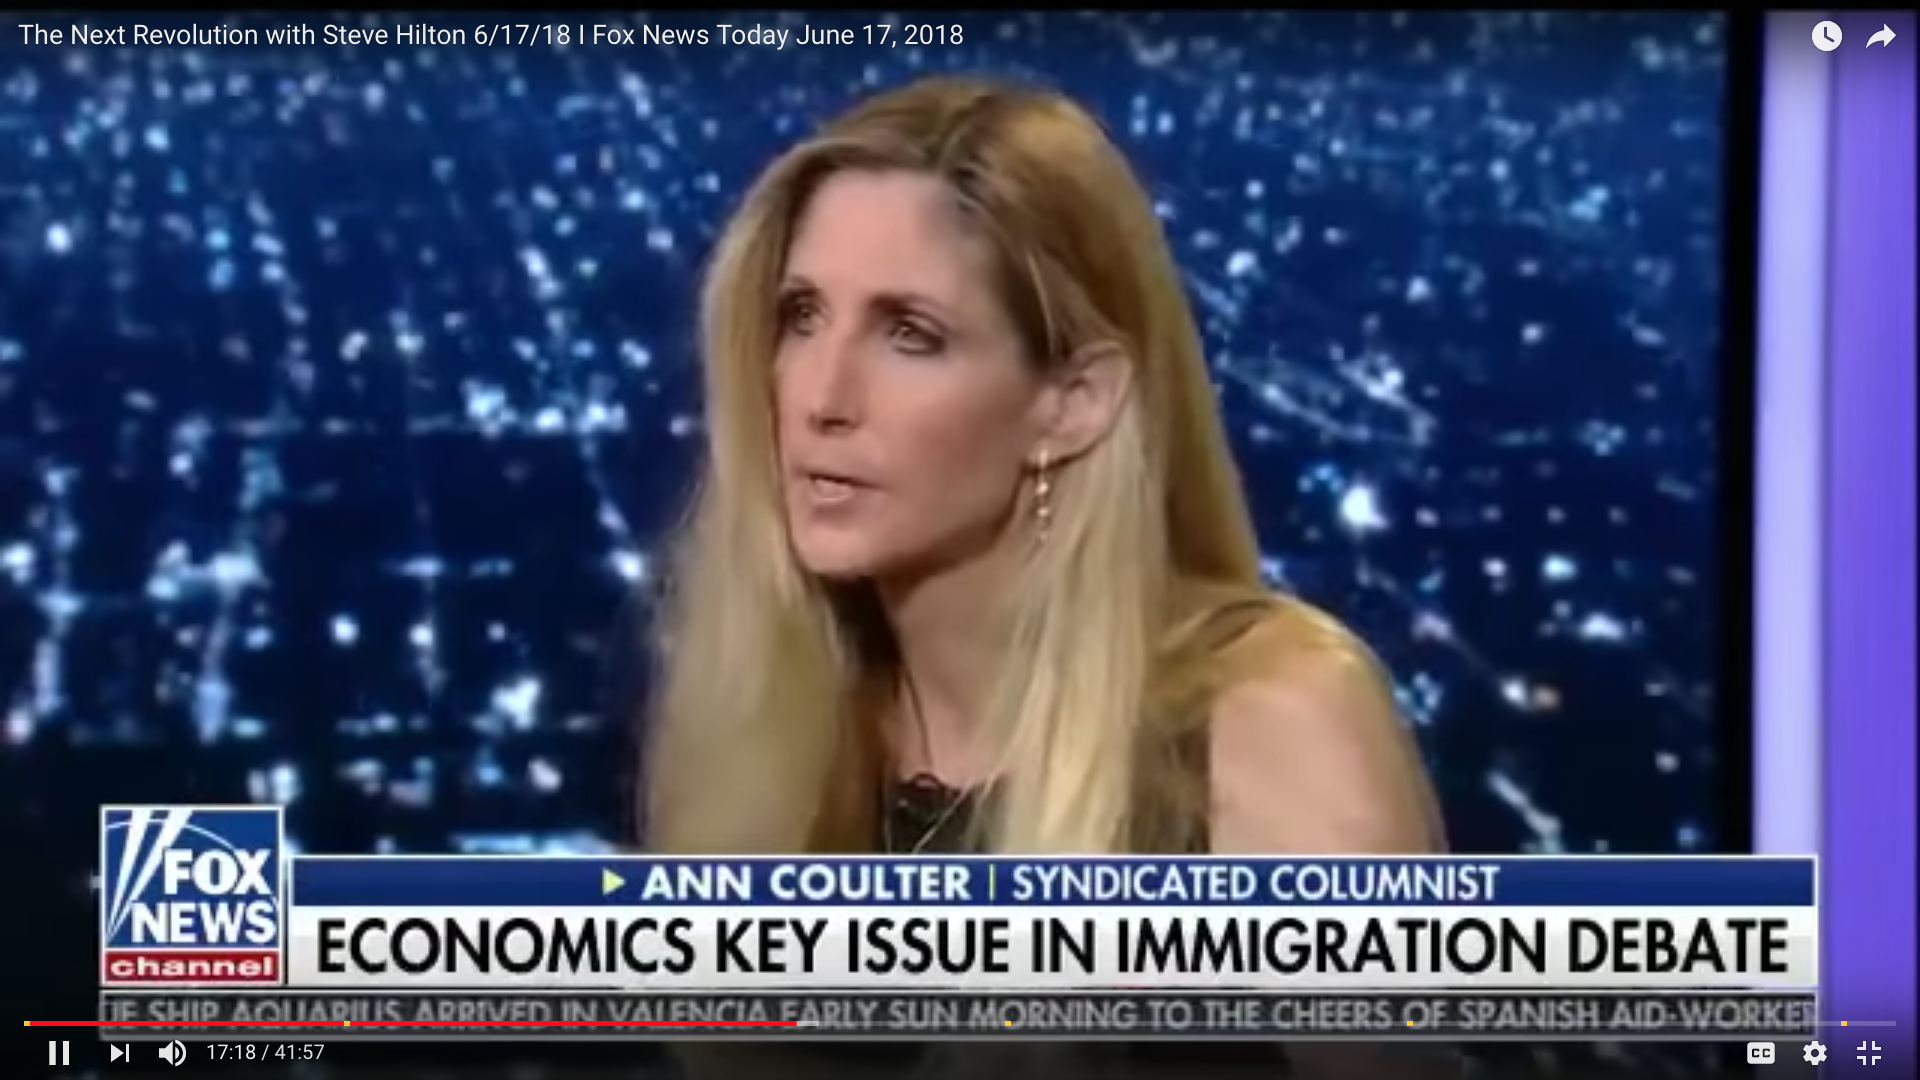 Ann Coulter on Fox News Today.